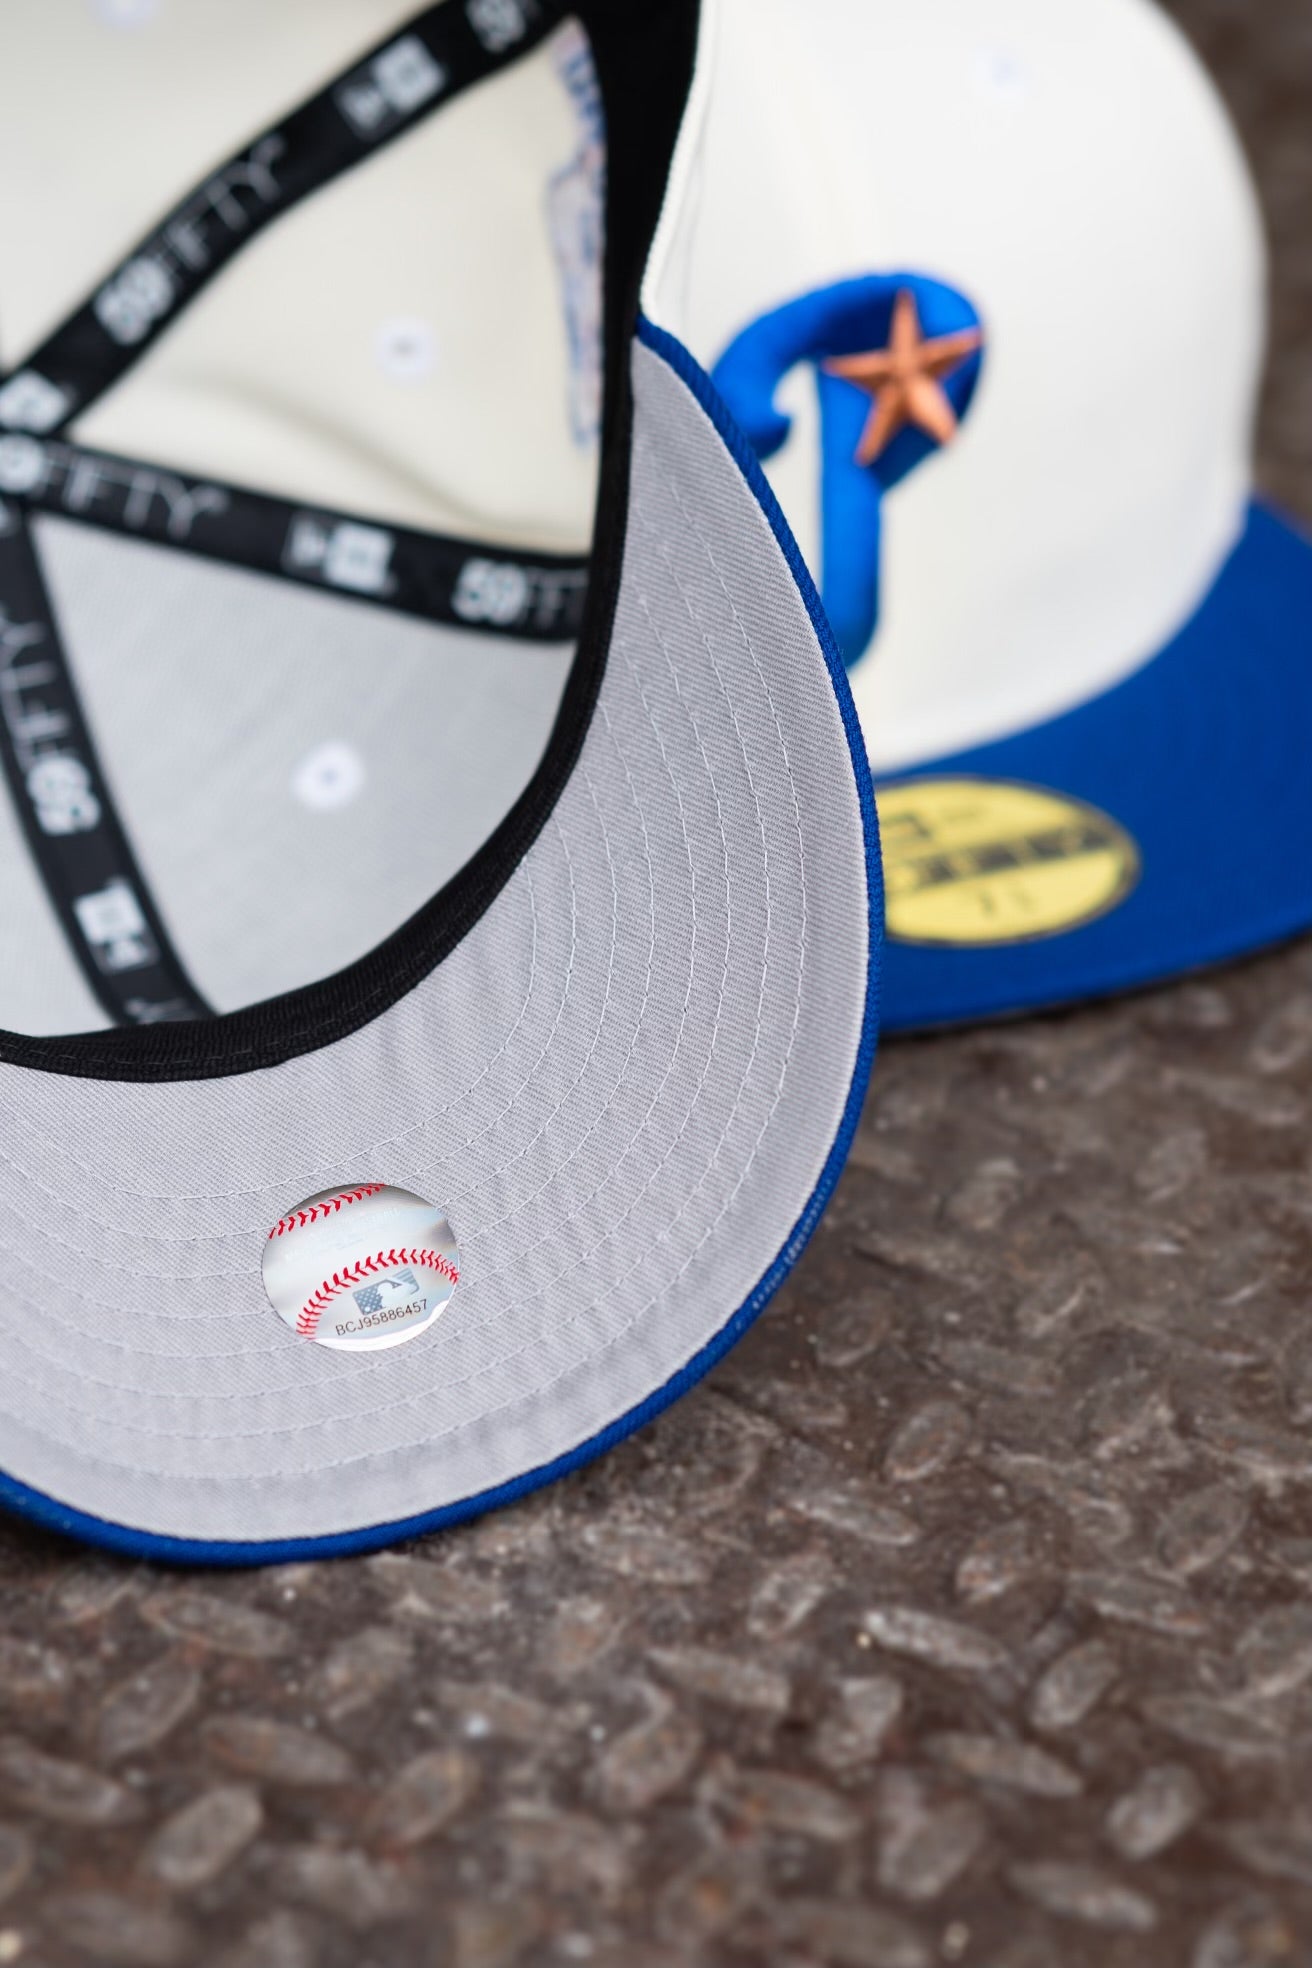 New Era Philadelphia Phillies 1996 ASG Grey UV (Off White/Royal) 59Fifty Fitted